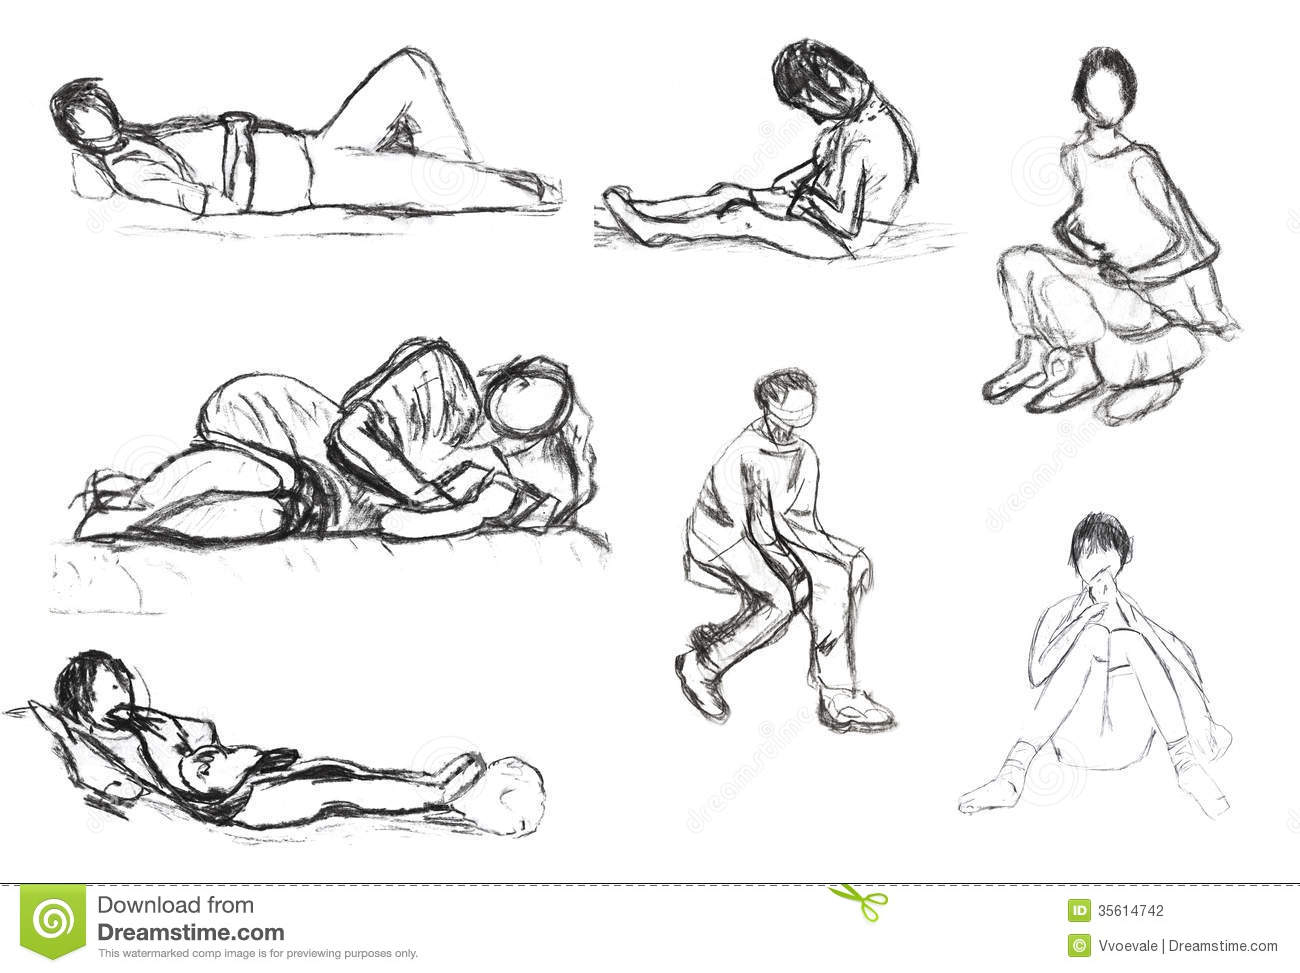 Children Drawing - Sketches Of People Motion Stock tout Position W Dessin